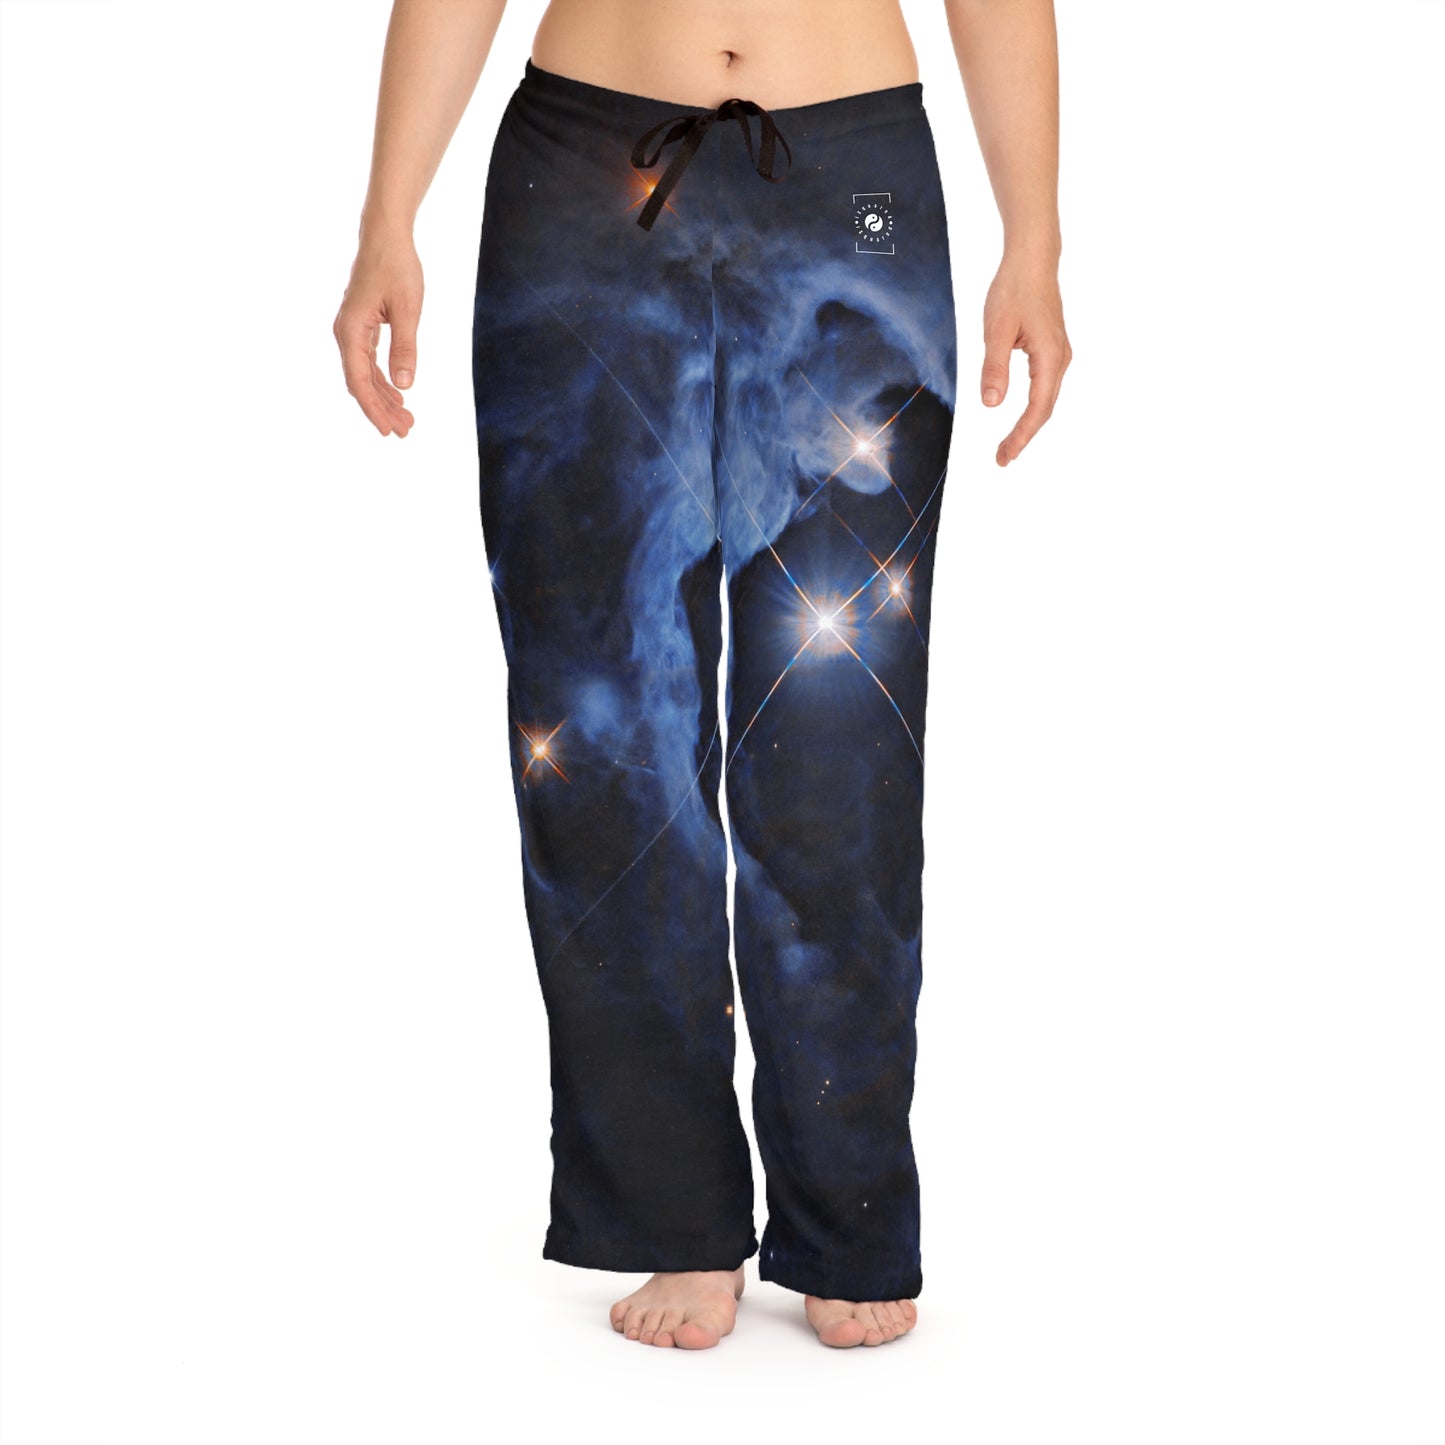 HP Tau, HP Tau G2, and G3 3 star system captured by Hubble - Women lounge pants